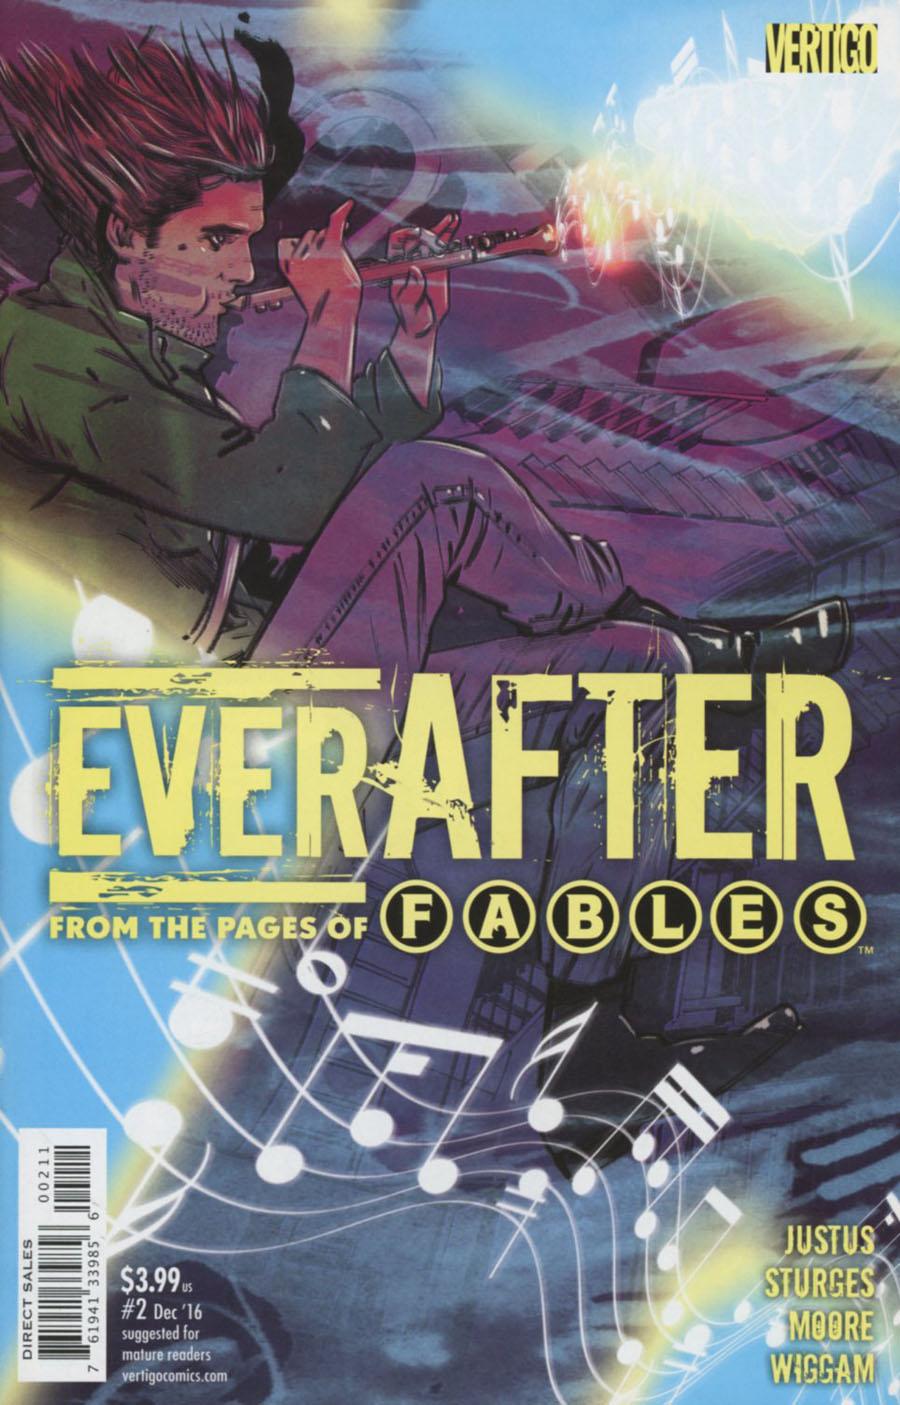 Everafter From The Pages Of Fables Vol. 1 #2